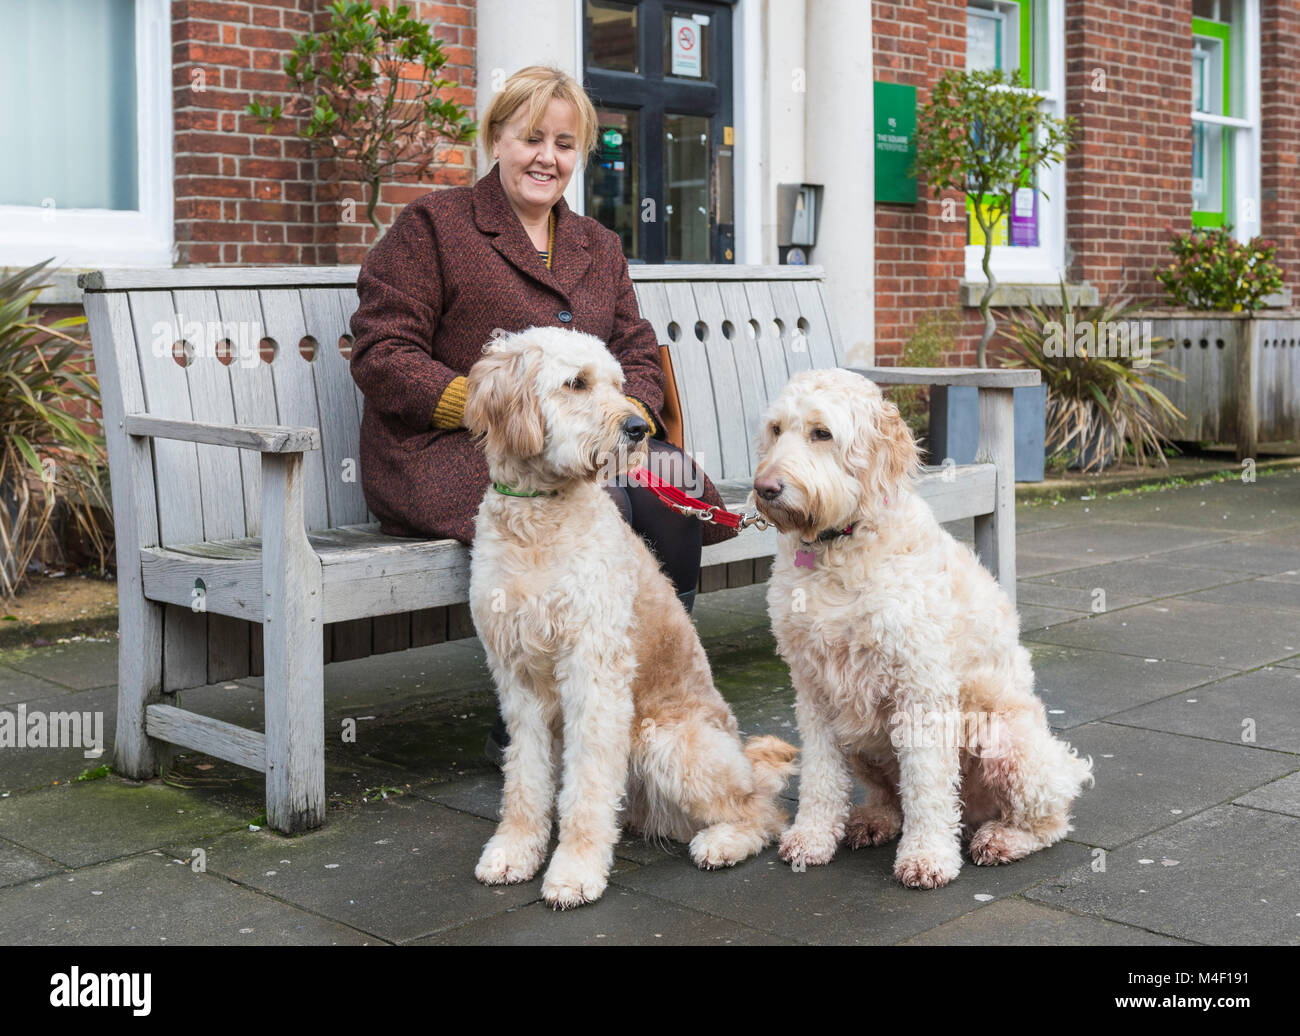 Pair of large white dogs, possibly Goldendoodle dogs, sitting with a woman on a bench in the UK. Stock Photo